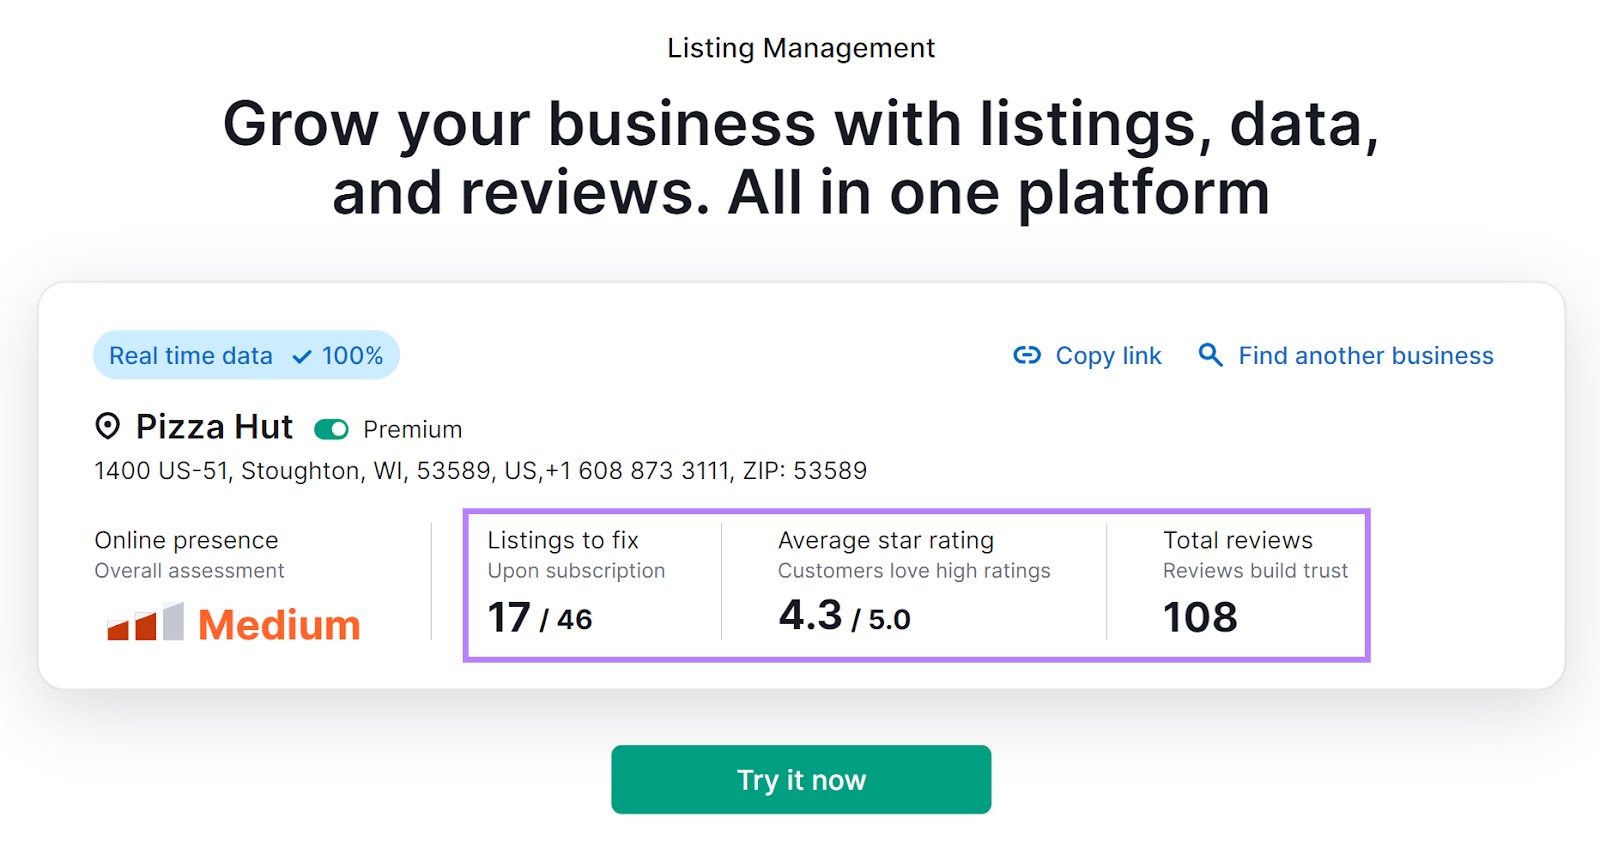 Listing Management tool summary report with the "Listings to fix", "Avg. star rating", and "Total reviews" highlighted.